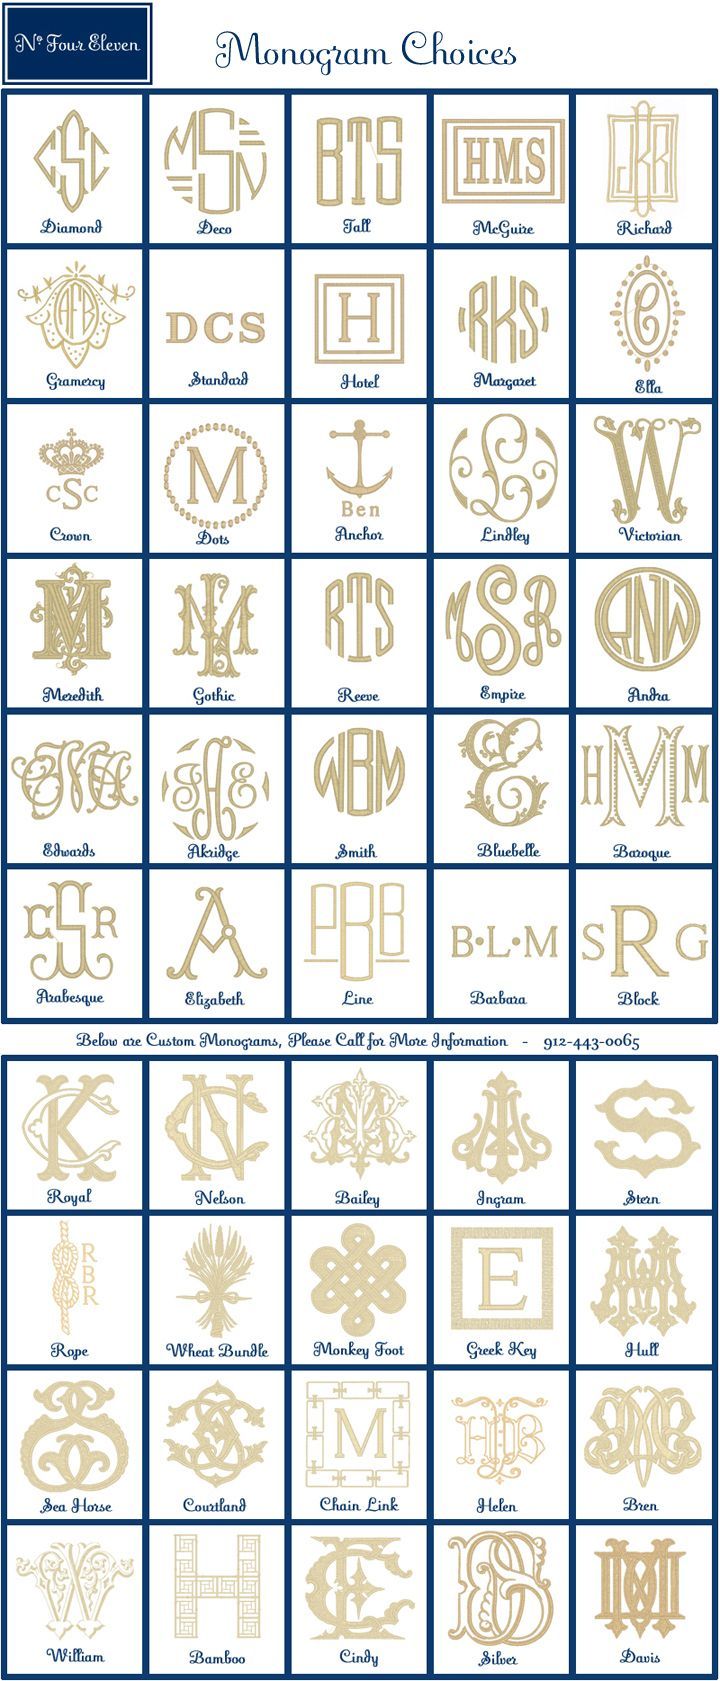 monogram chart – great reference for times you need something other than a traditional monogram